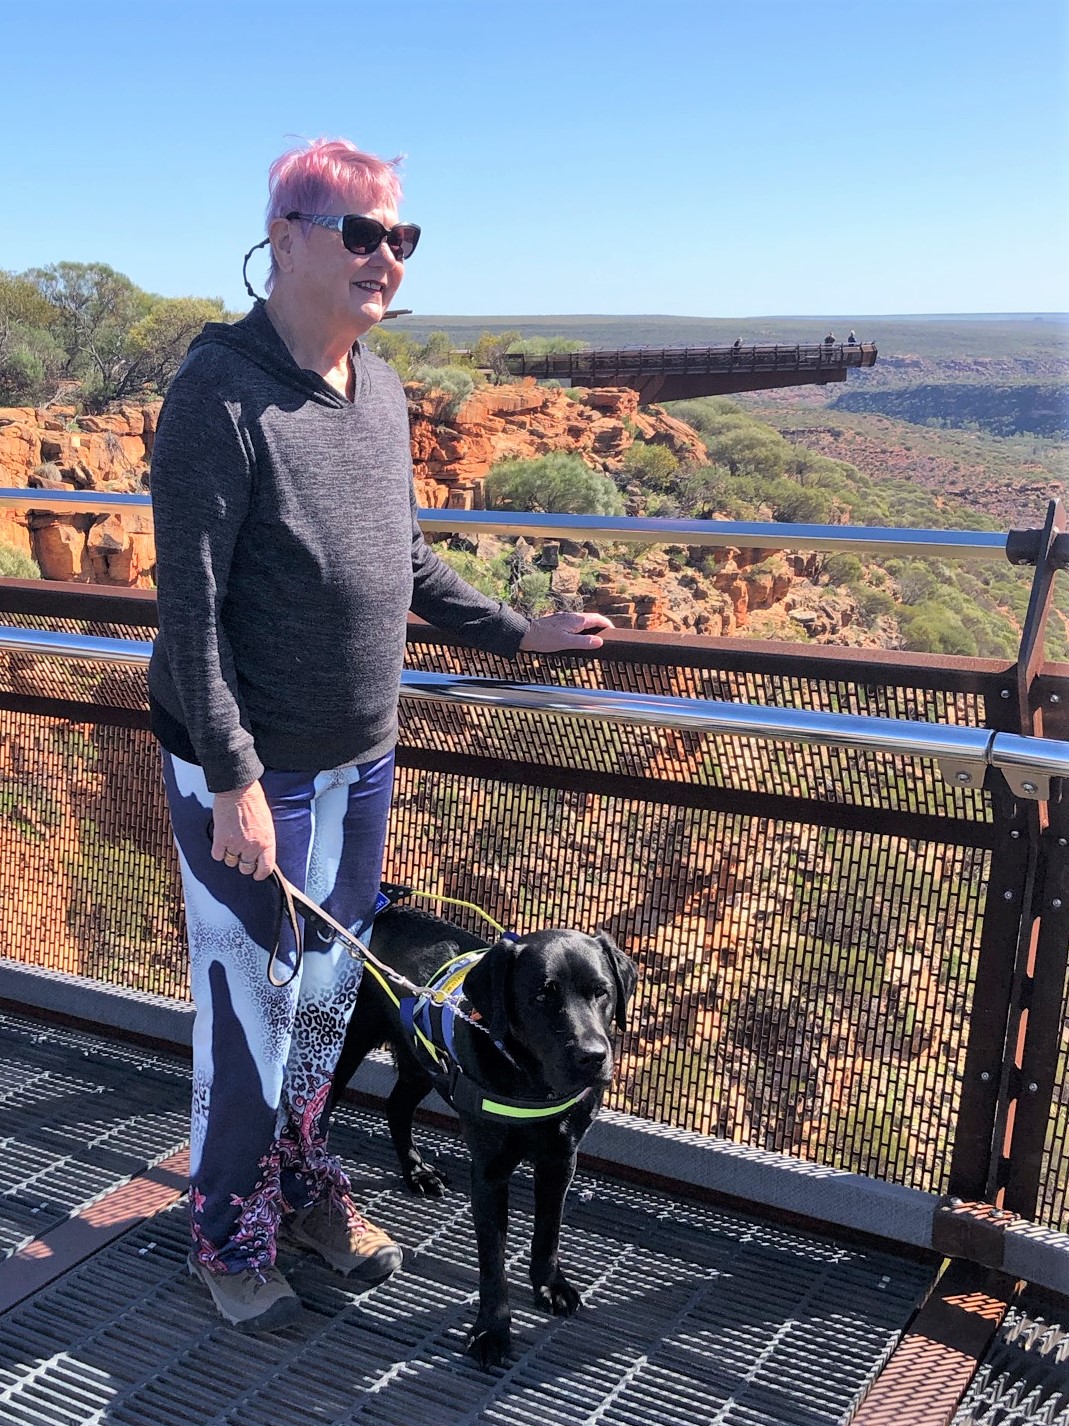 Monika stands next to Seeing Eye Dog Windsor, Monika is holding on to a railing at a lookout point which is over a cliff face, with a view of a vast horizon.